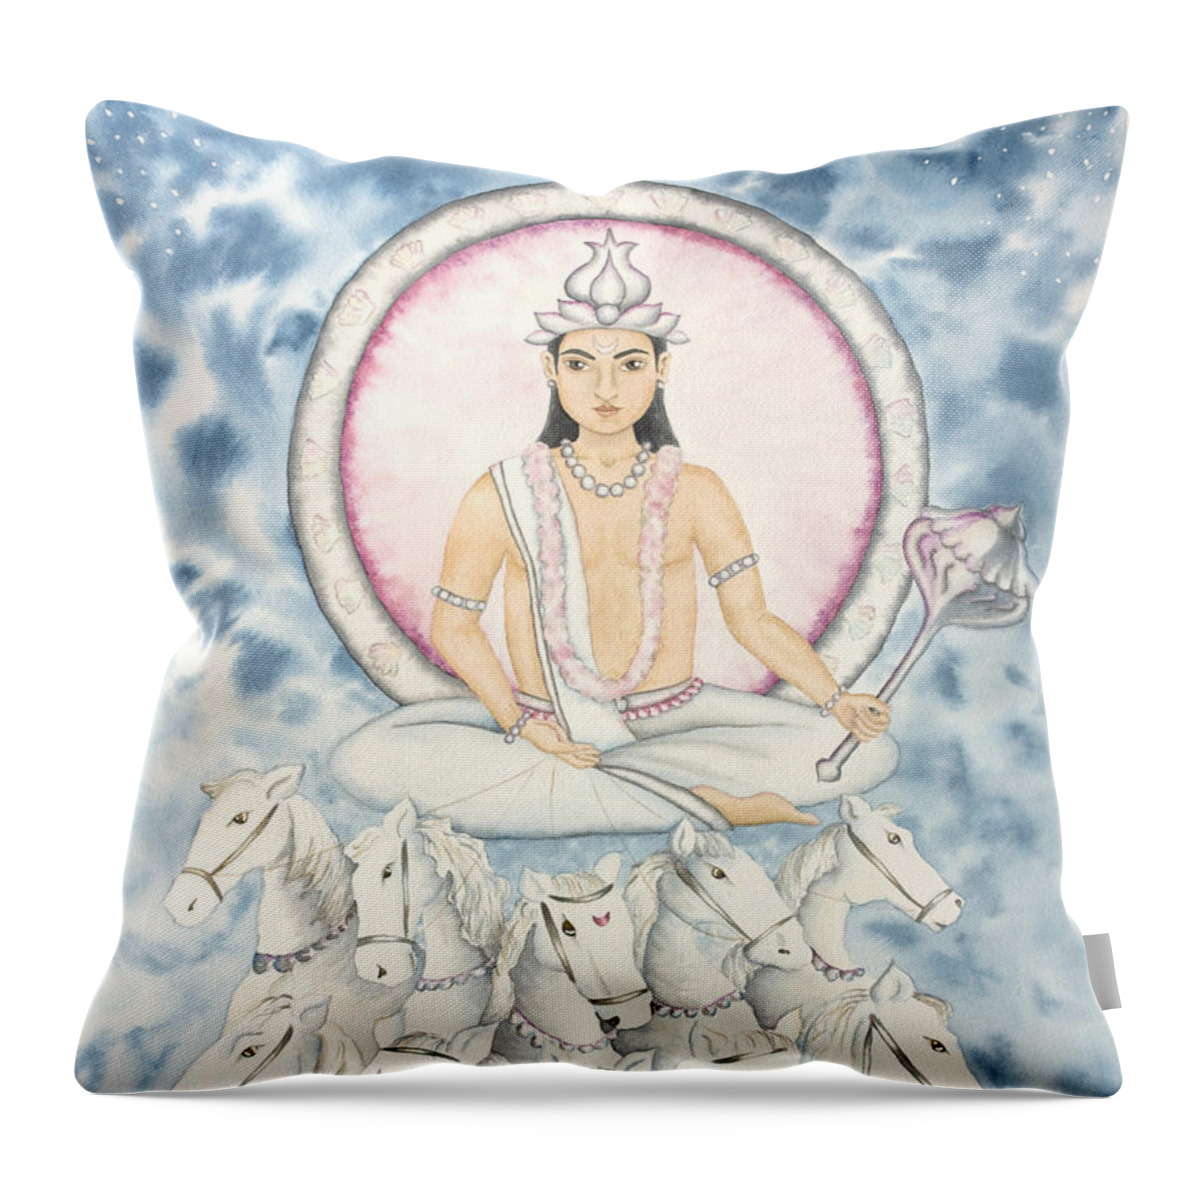 Vedic Astrology Throw Pillow featuring the painting Chandra The Moon by Srishti Wilhelm